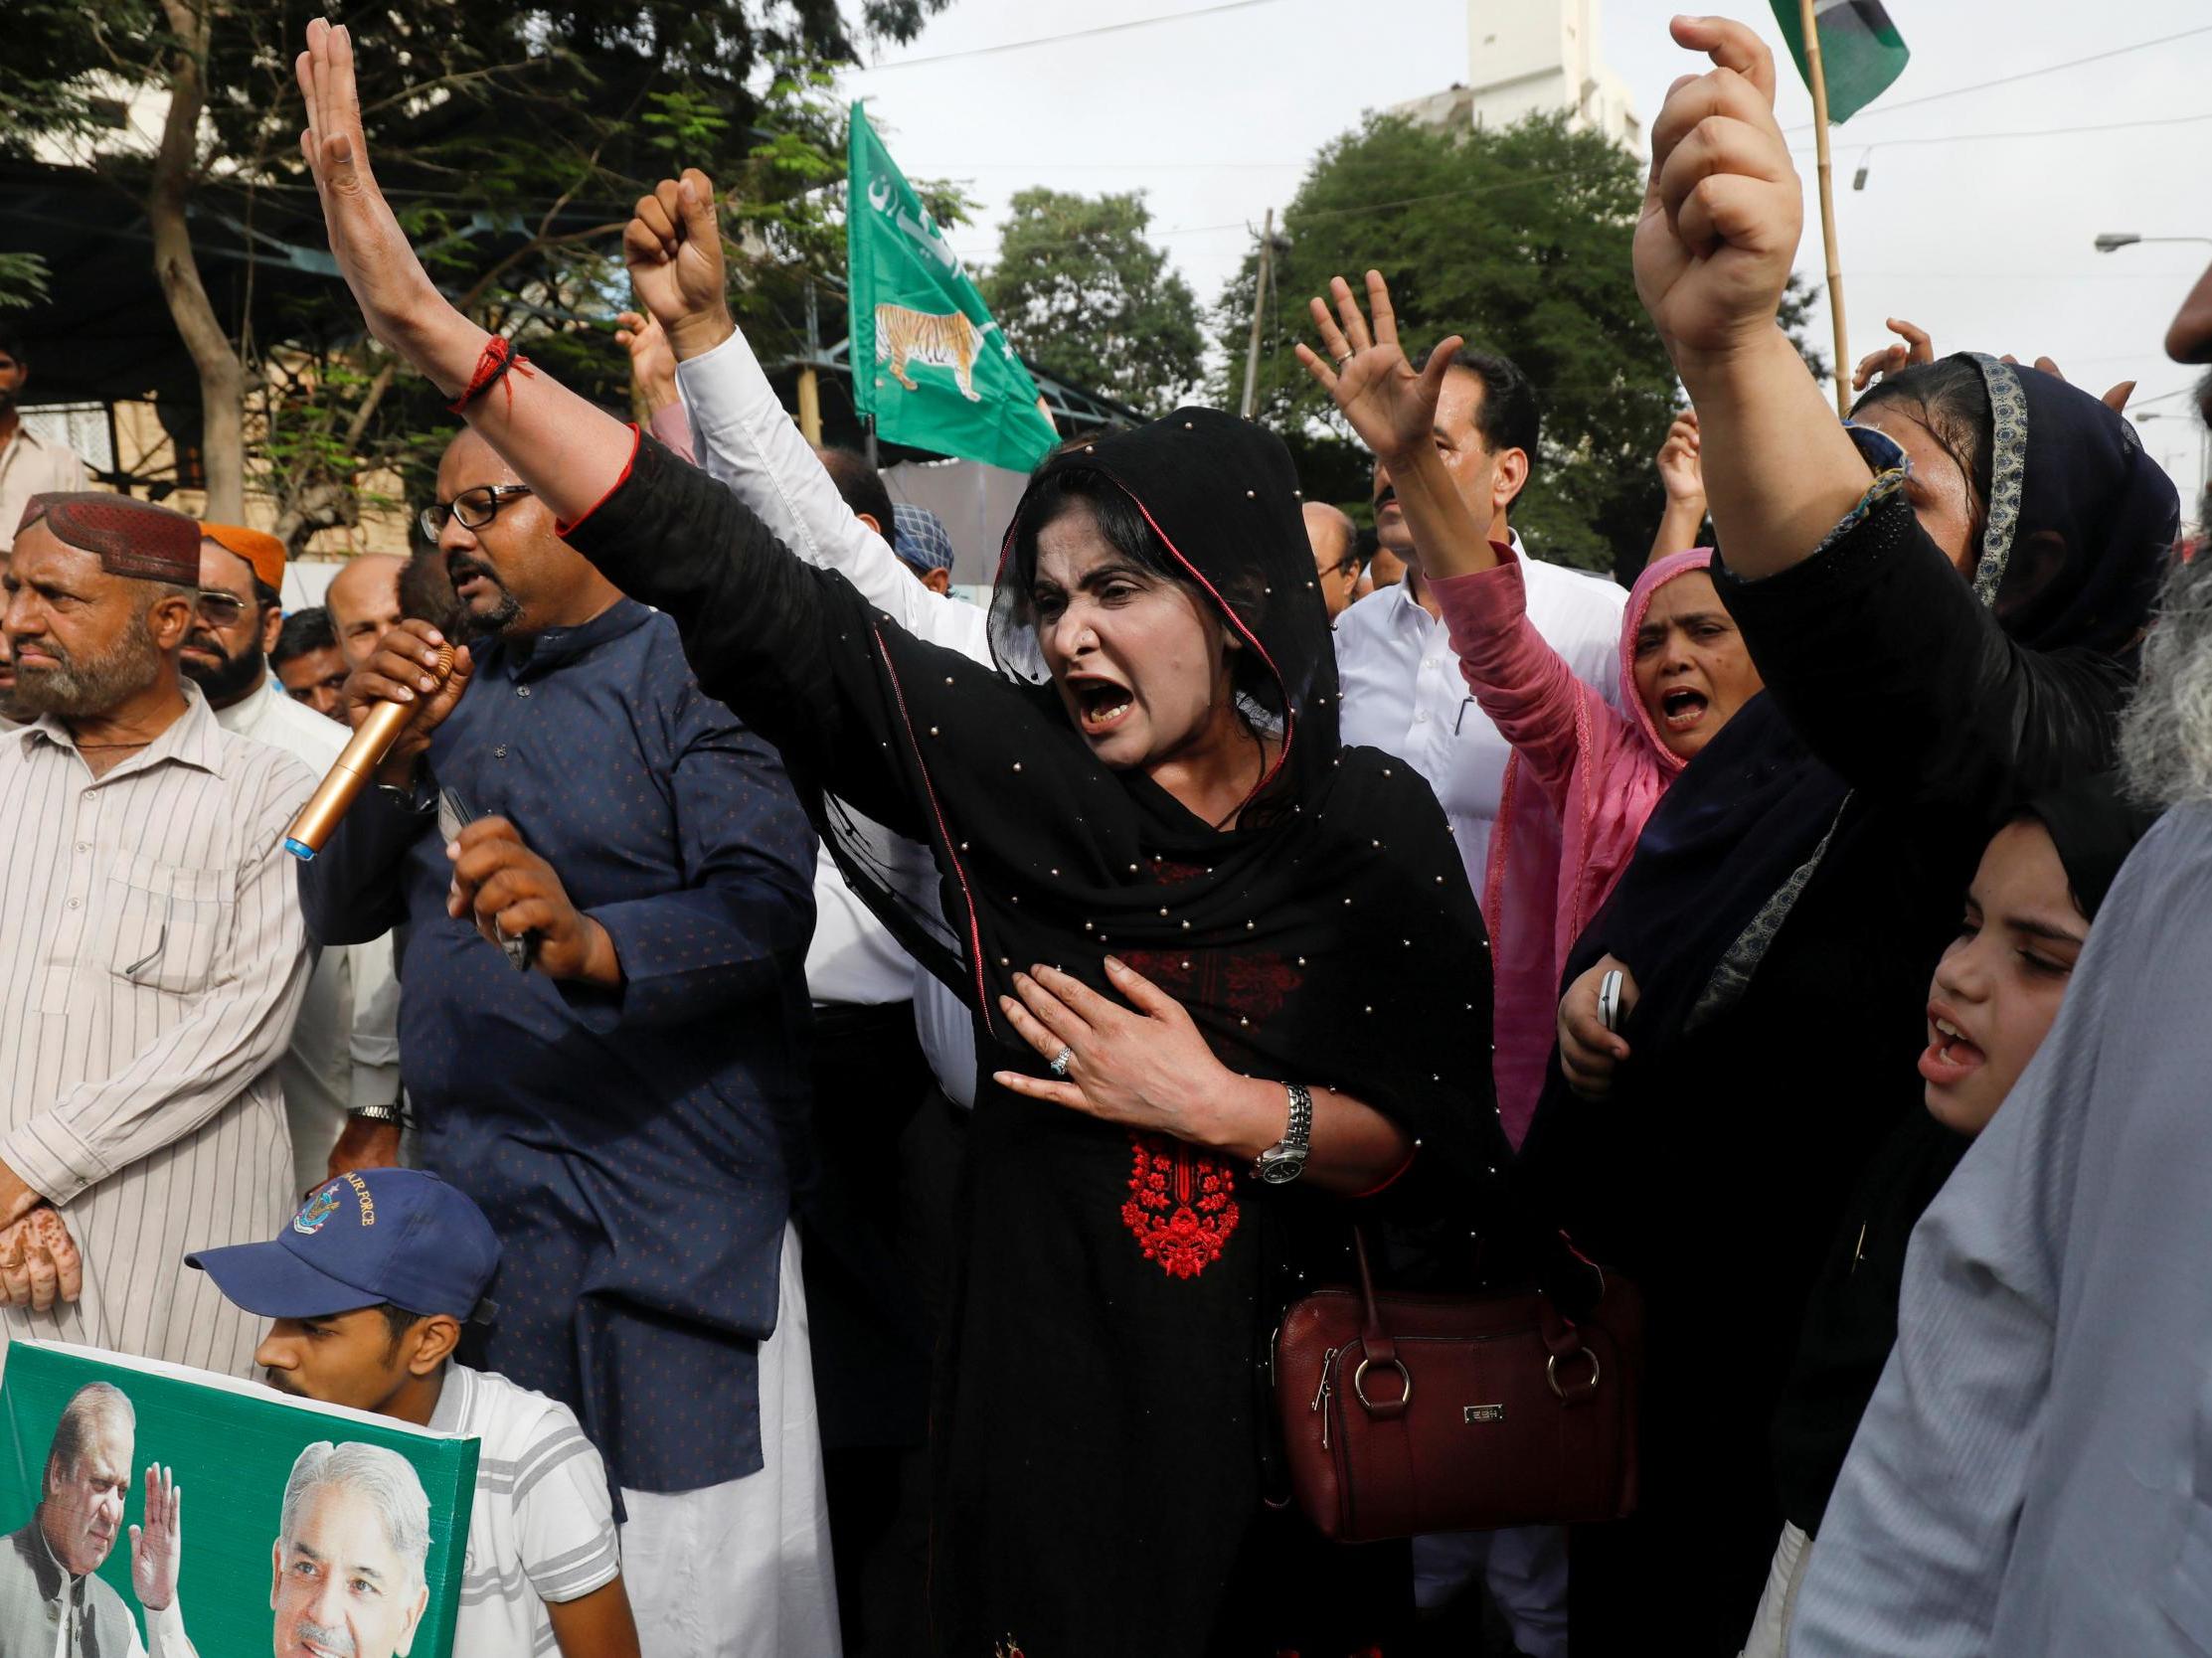 Supporters of Mr Sharif in Karachi tried to welcome him back to the country